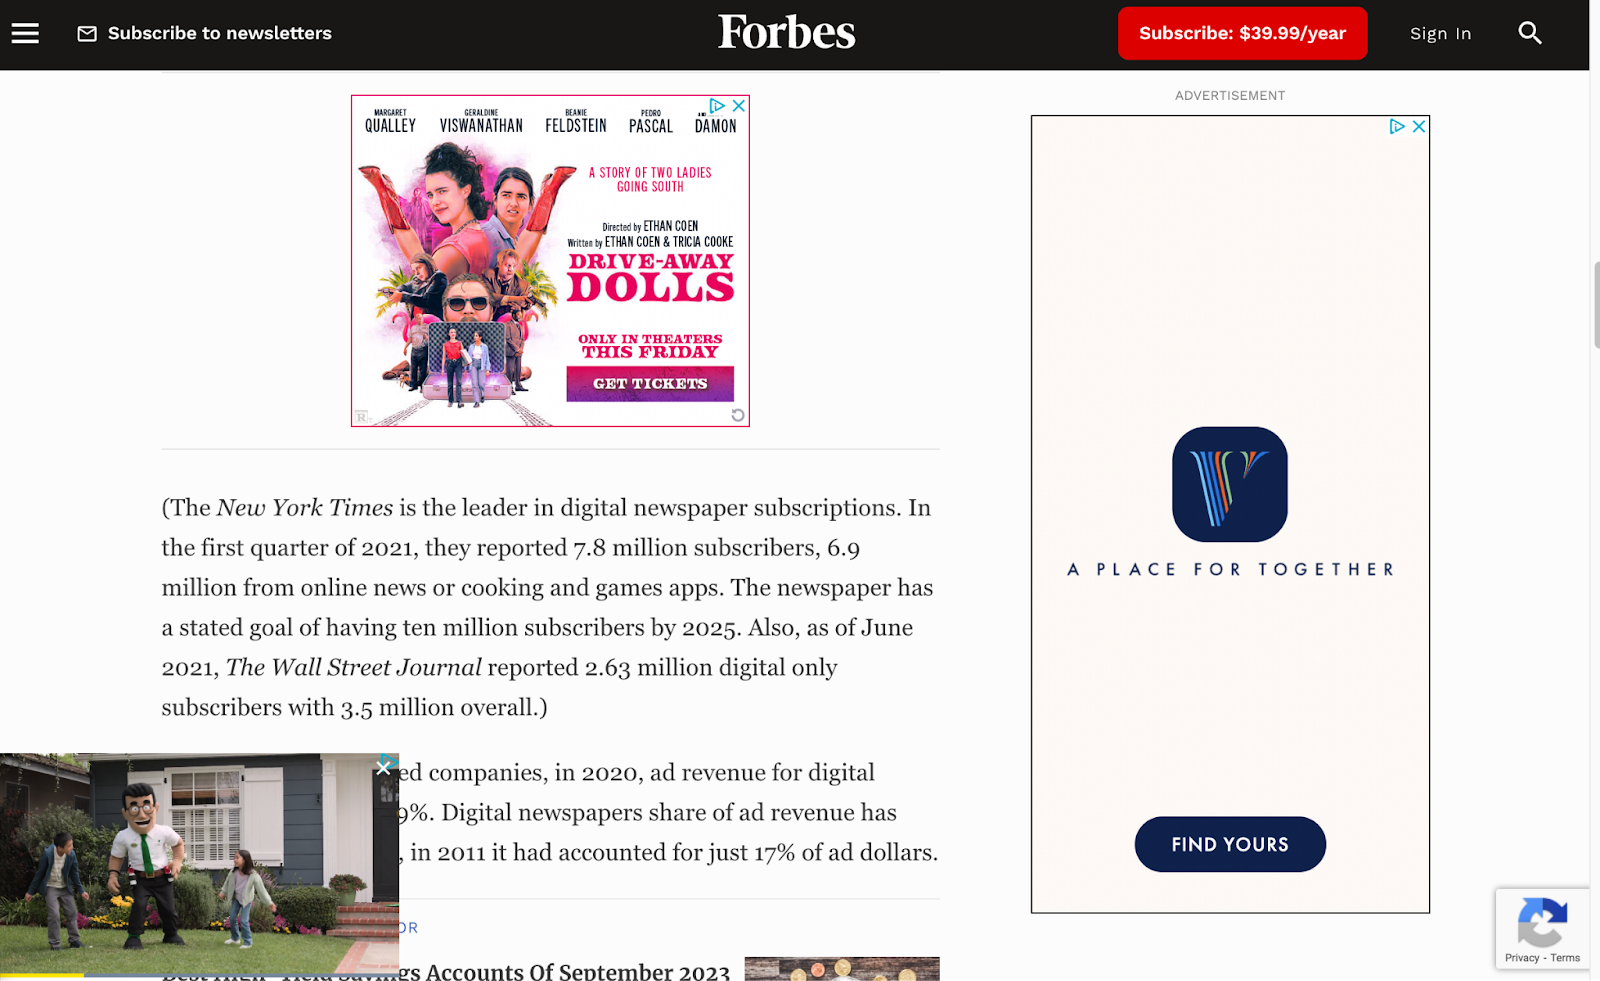 Forbes news article